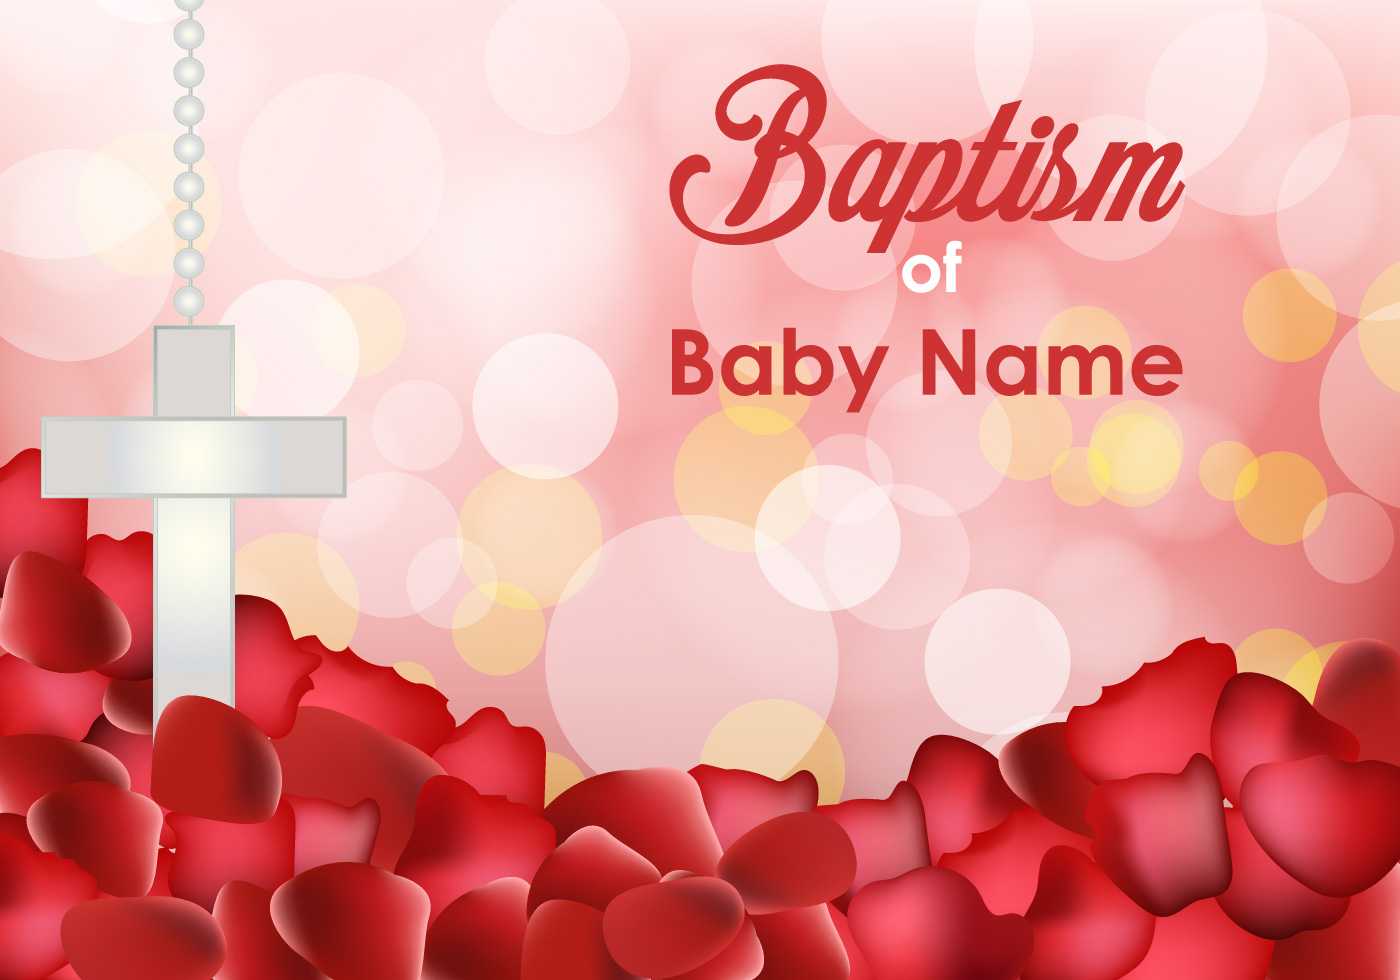 Baptism Invitation Free Vector Art – (62 Free Downloads) Within Free Christening Invitation Cards Templates